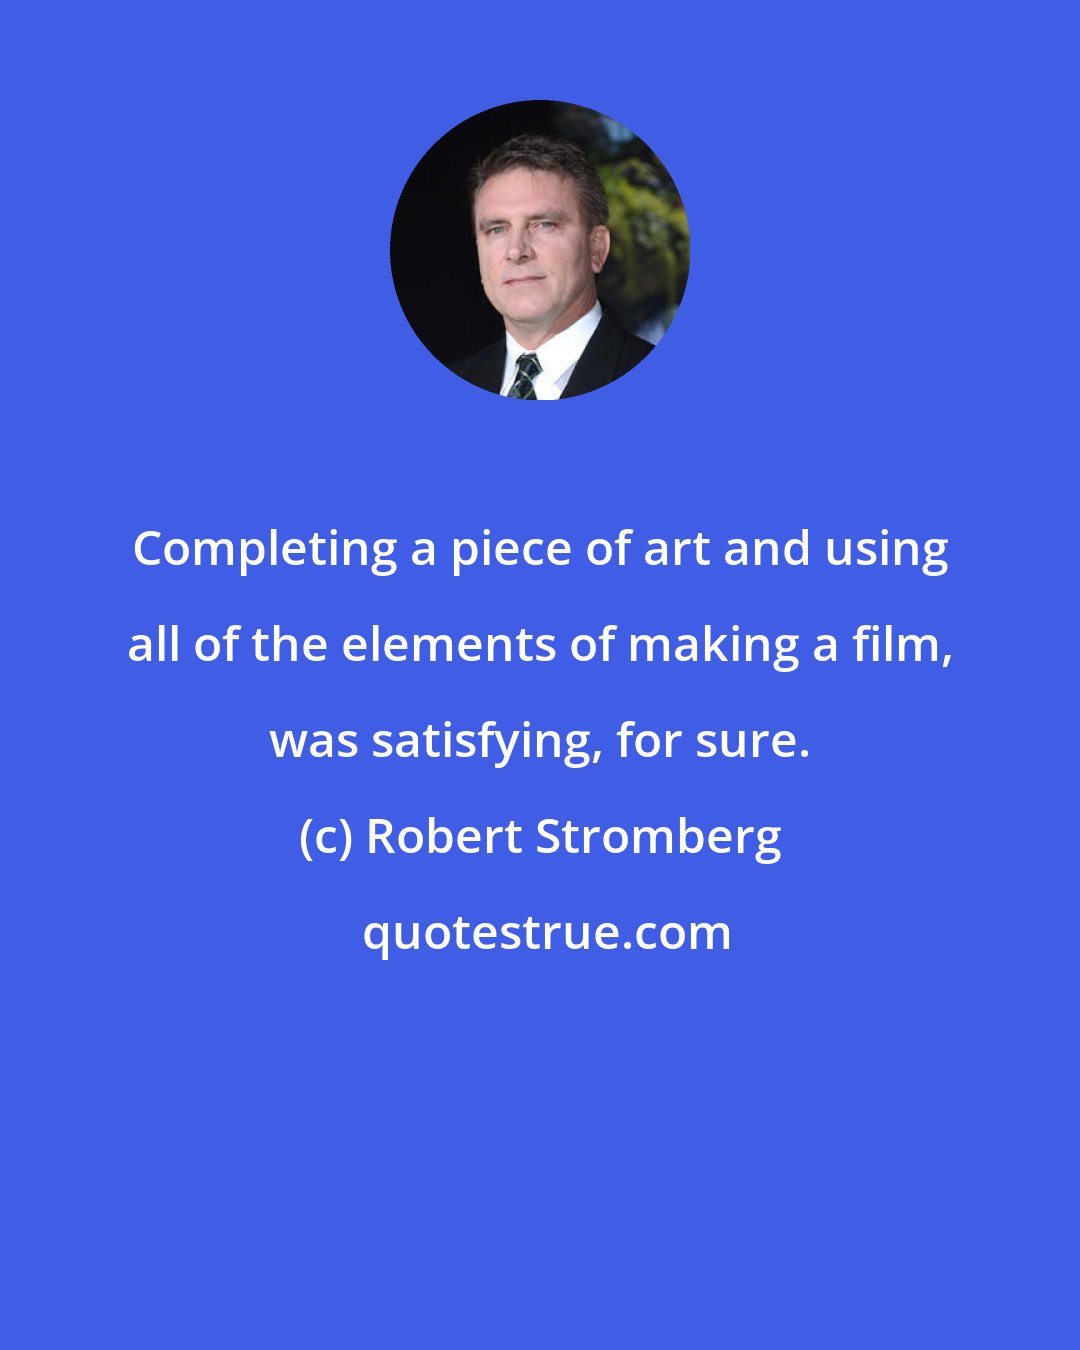 Robert Stromberg: Completing a piece of art and using all of the elements of making a film, was satisfying, for sure.